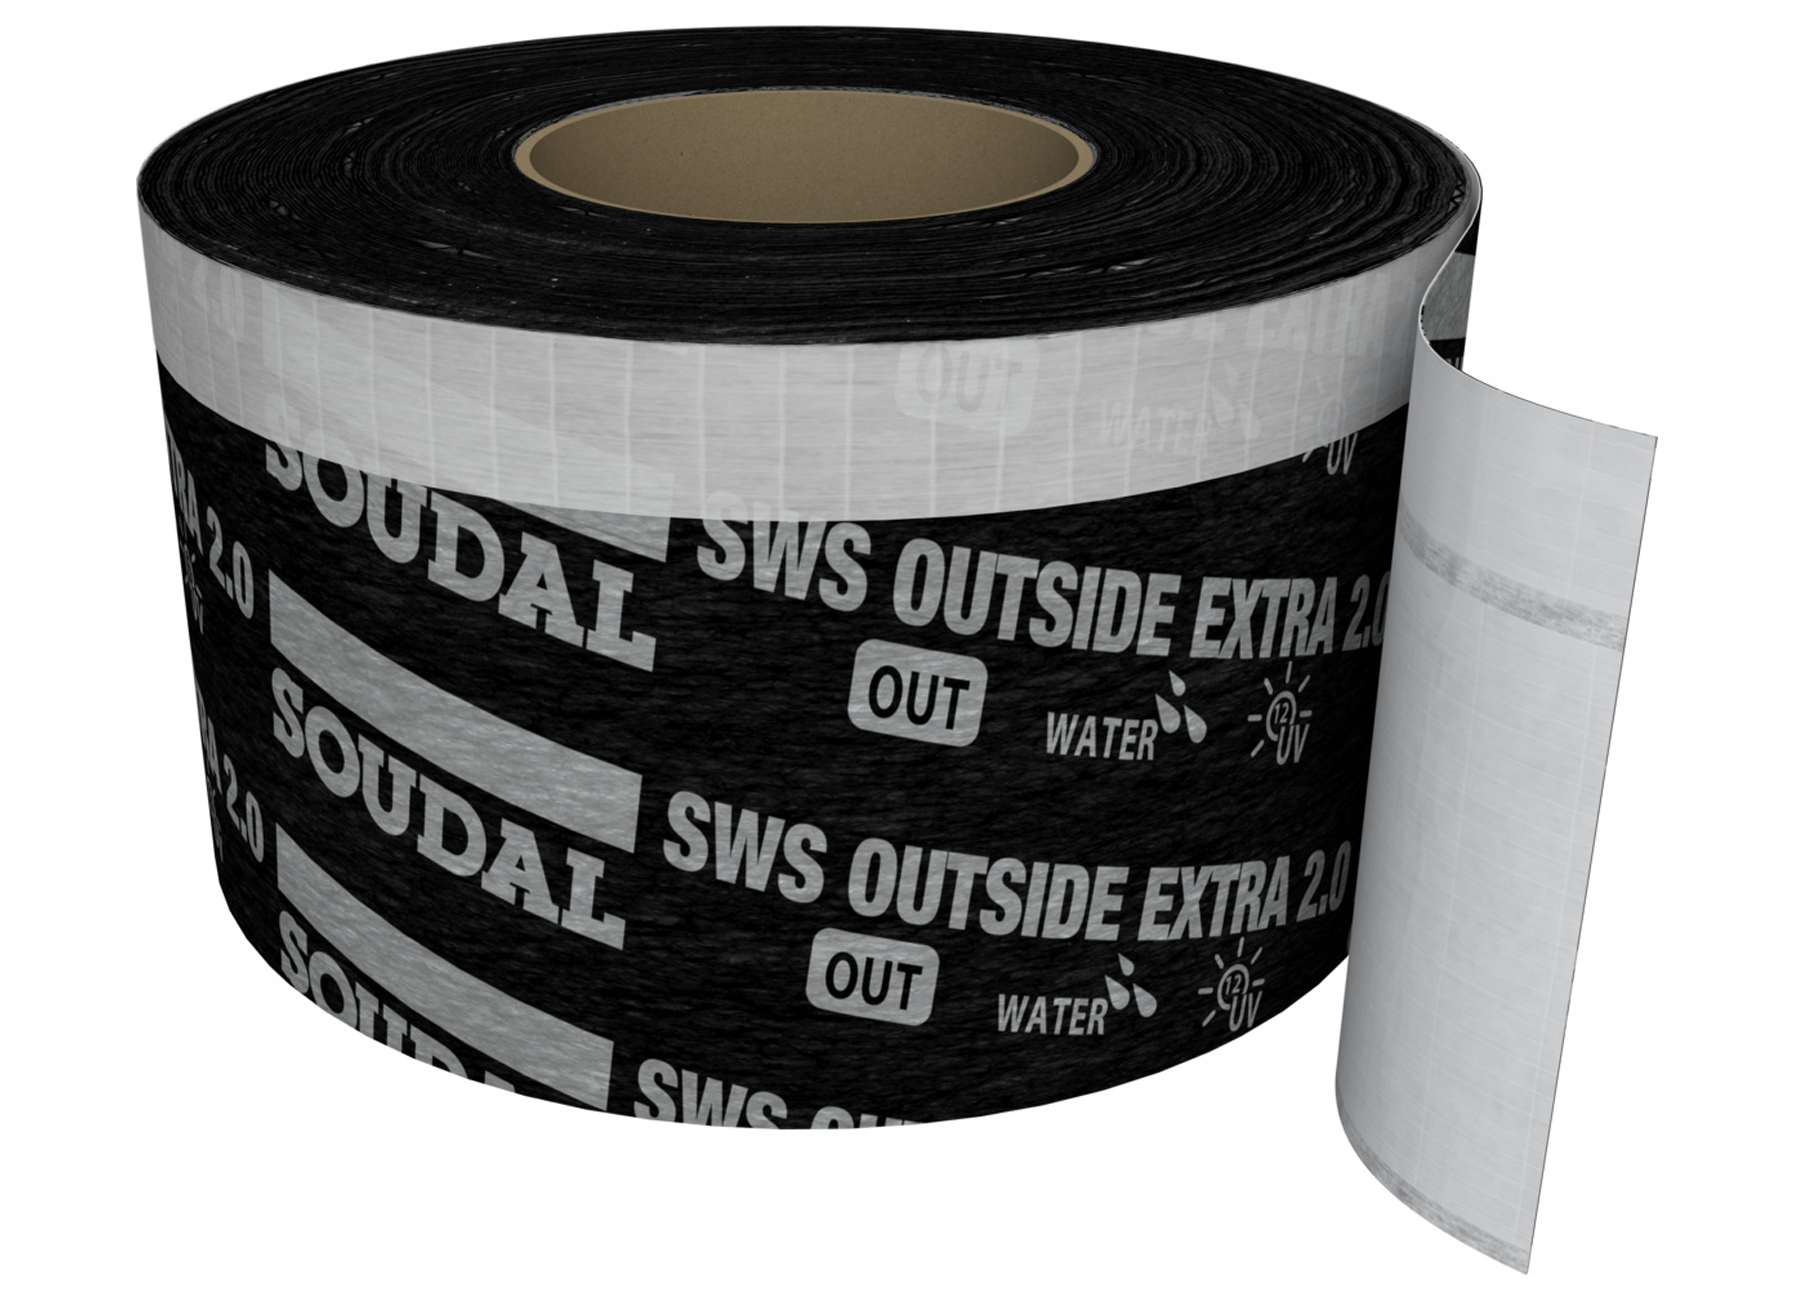 SOUDAL SWS OUTSIDE EXTRA 2.0 300MM